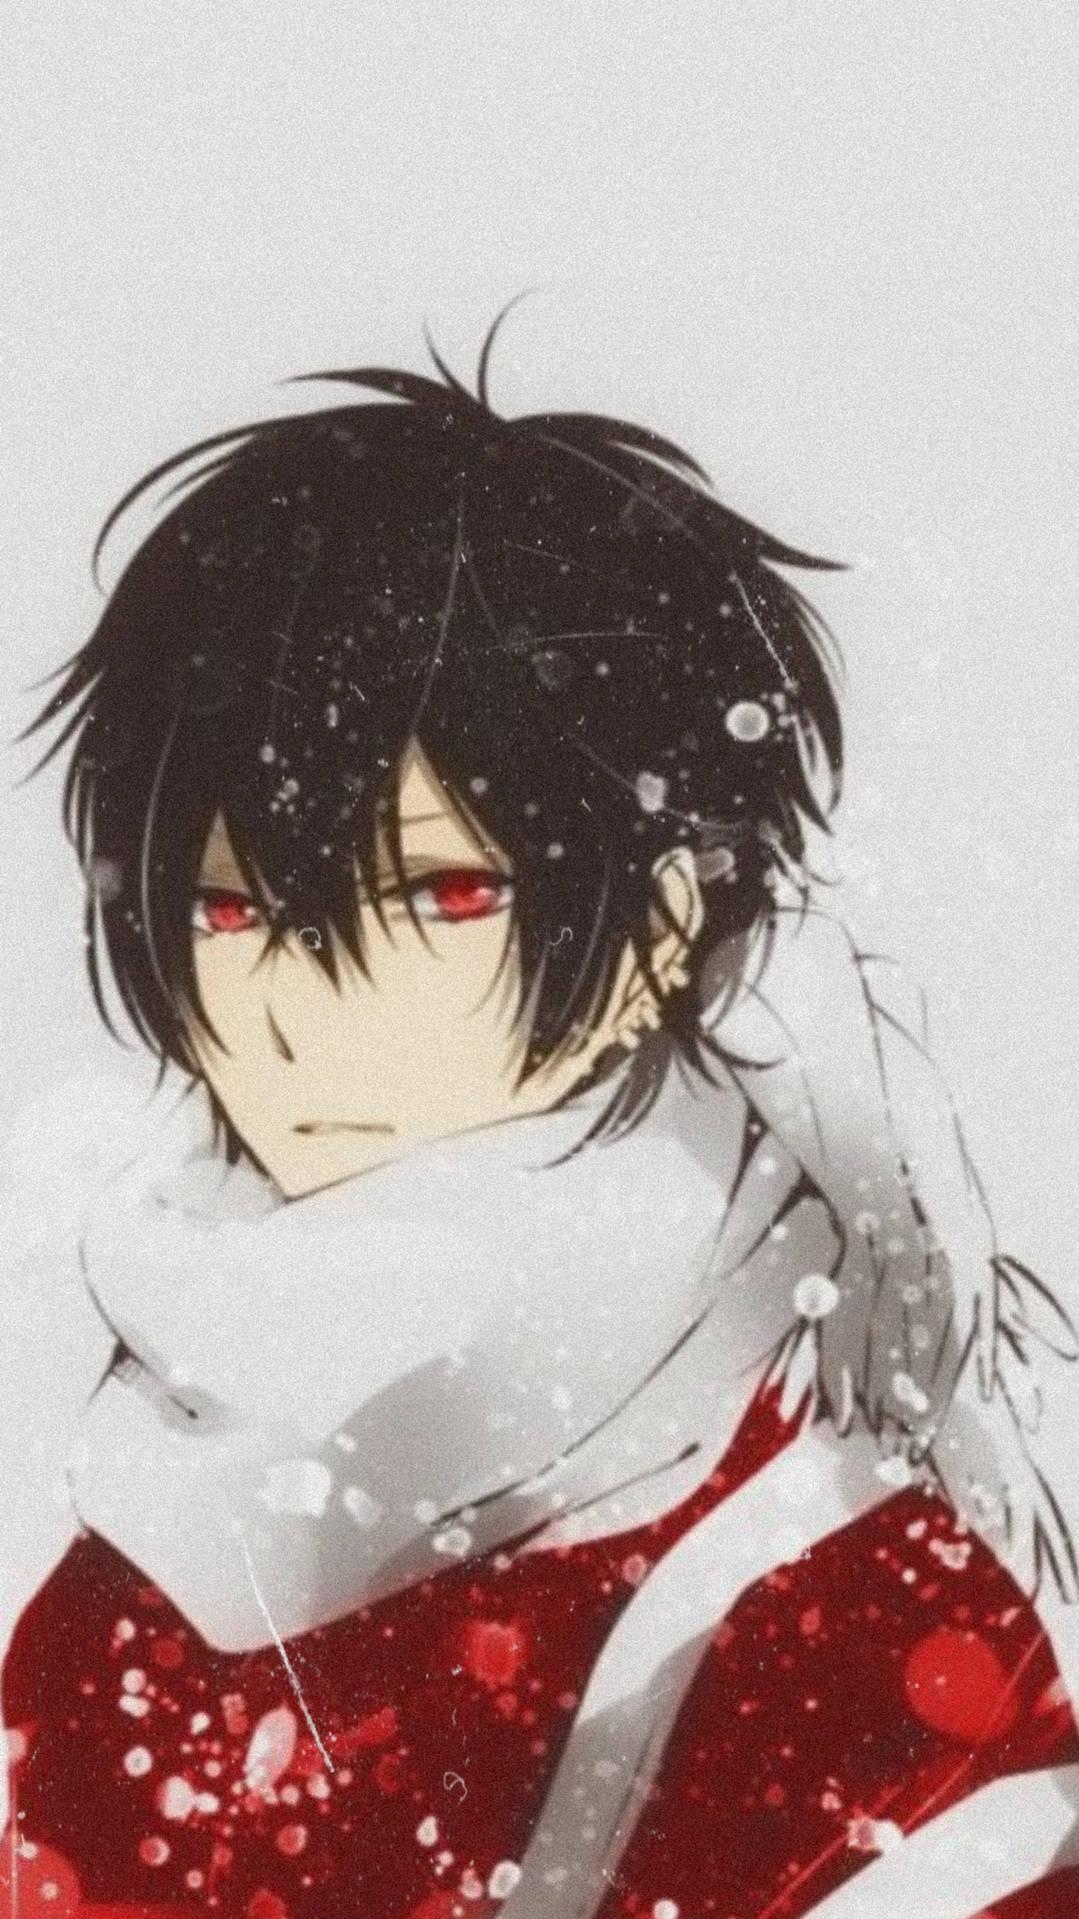 Download Aesthetic Anime Boy Winter Scarf Wallpaper